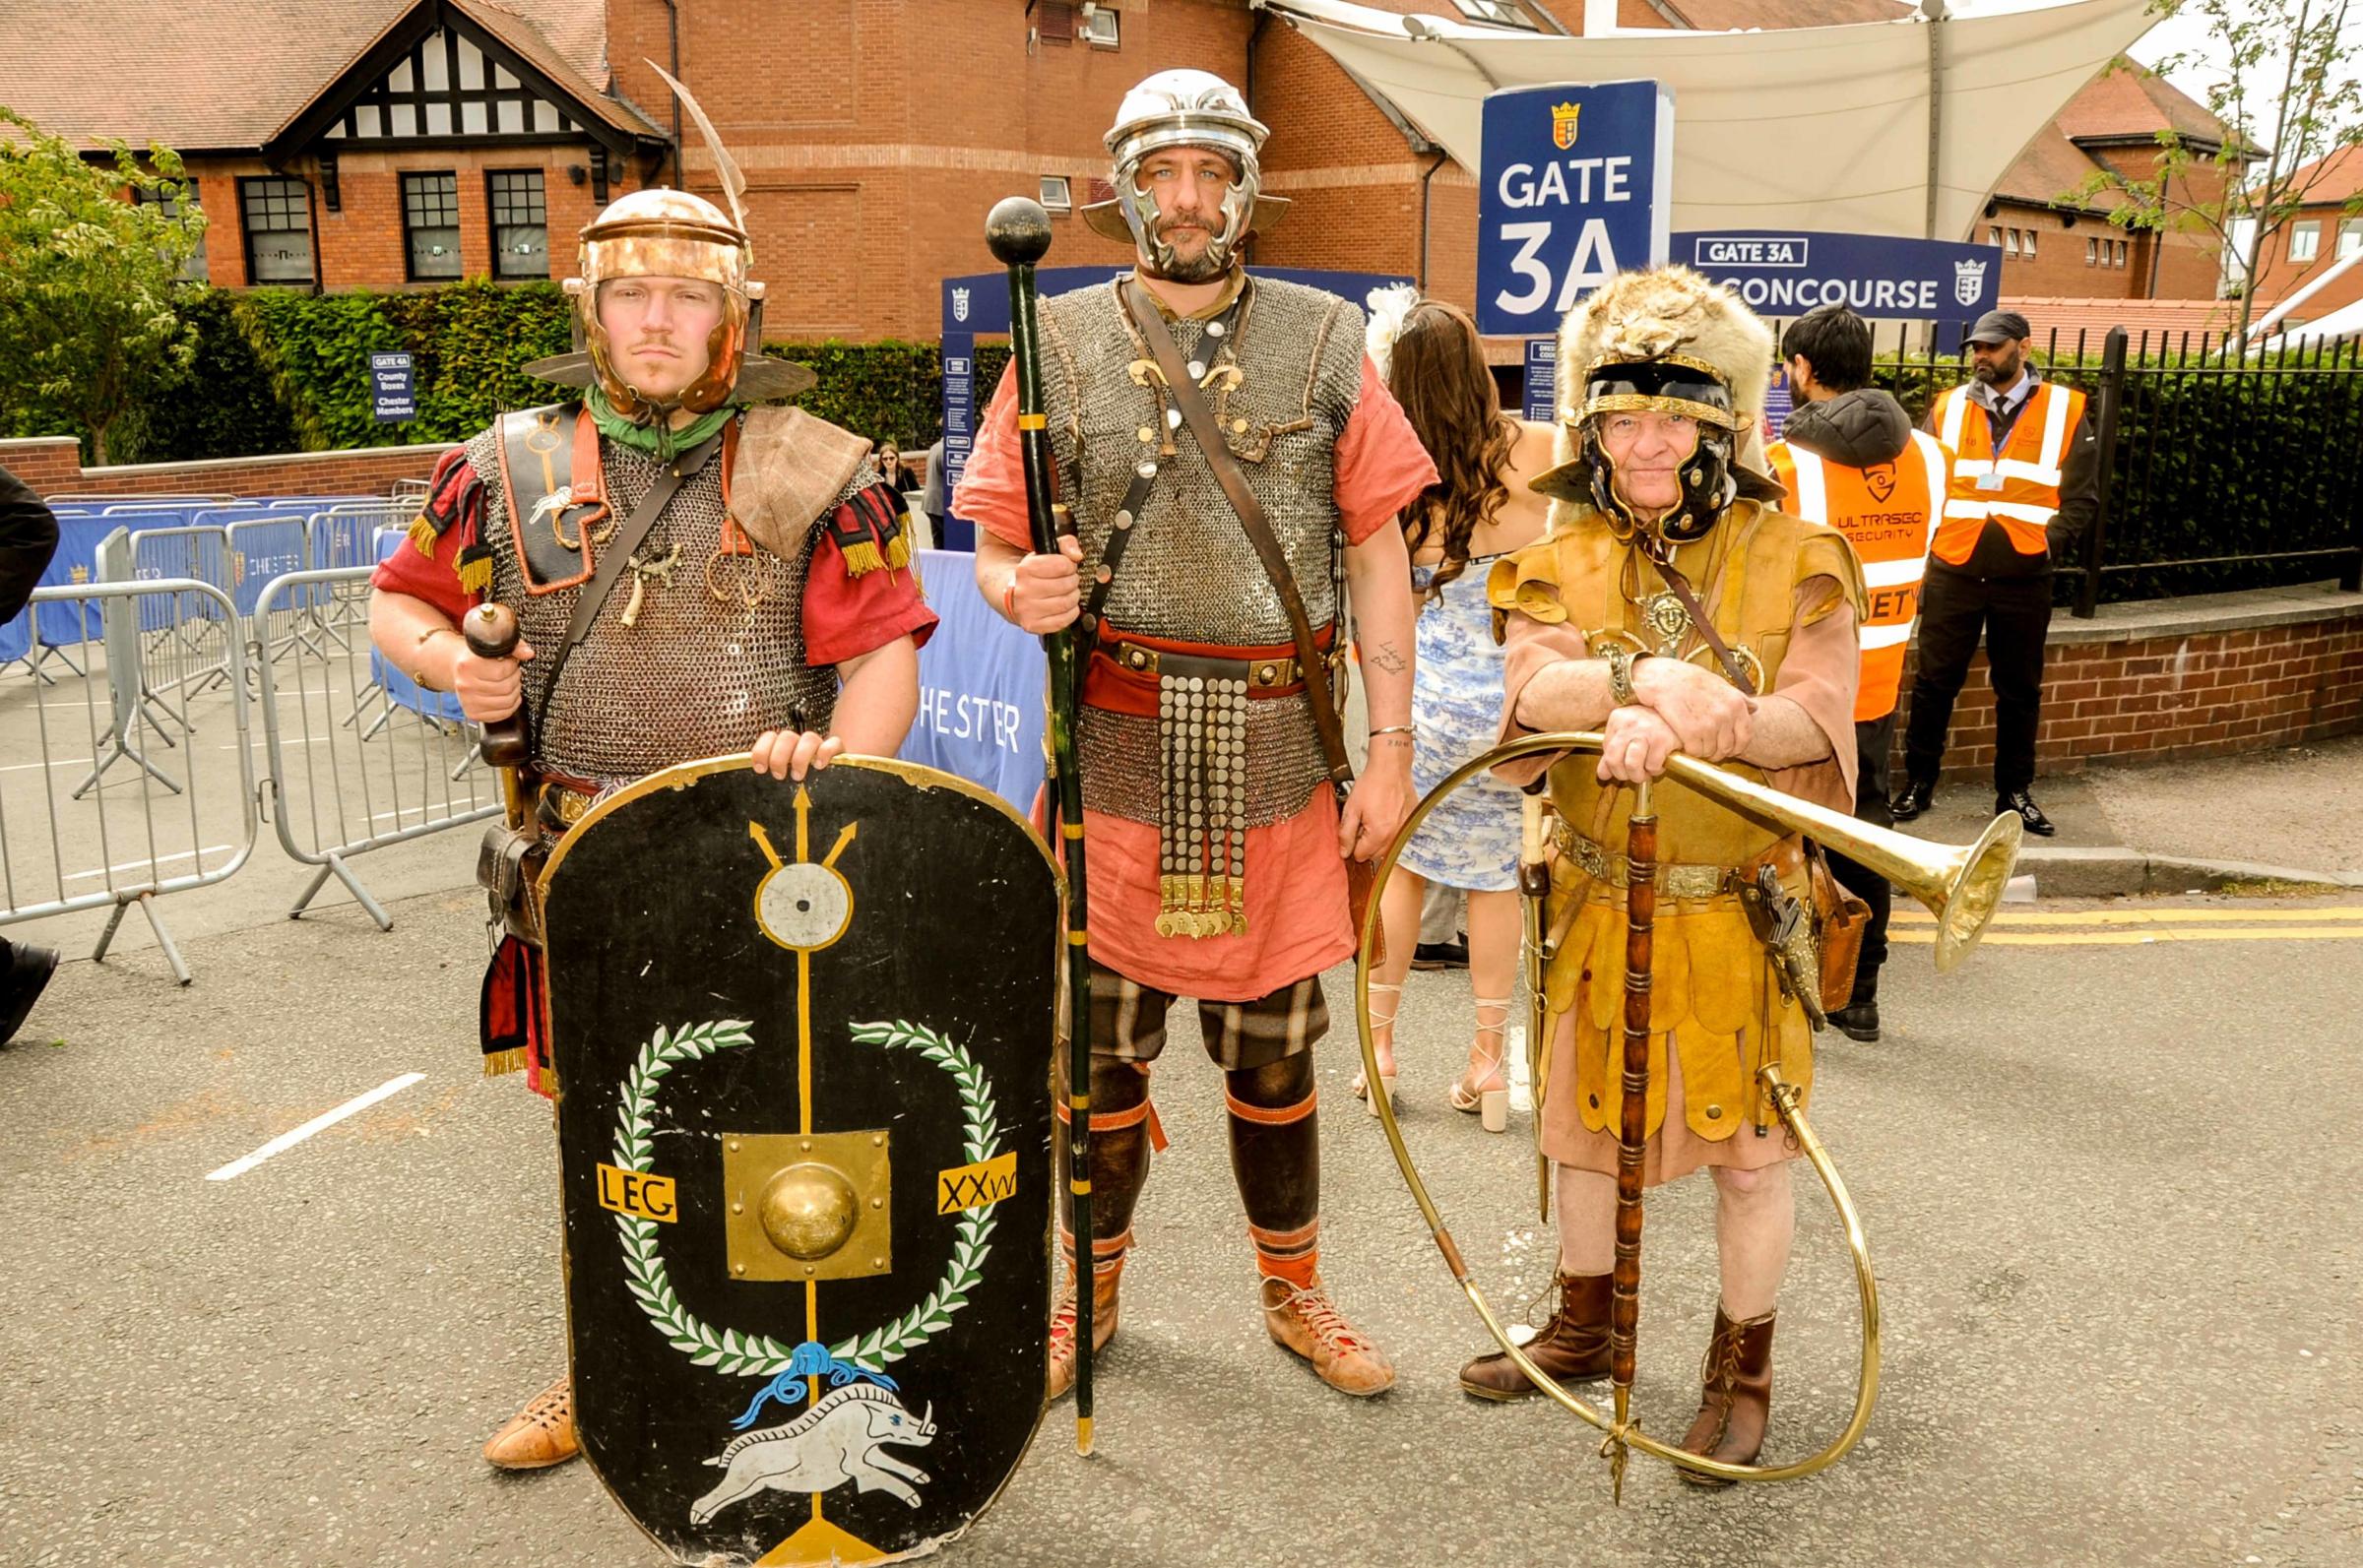 On guard, Roman soldiers Colin Jones, Tom Hudson and Ed Greenhalgh of Chester Roman Tours. All pictures: Simon Warburton.